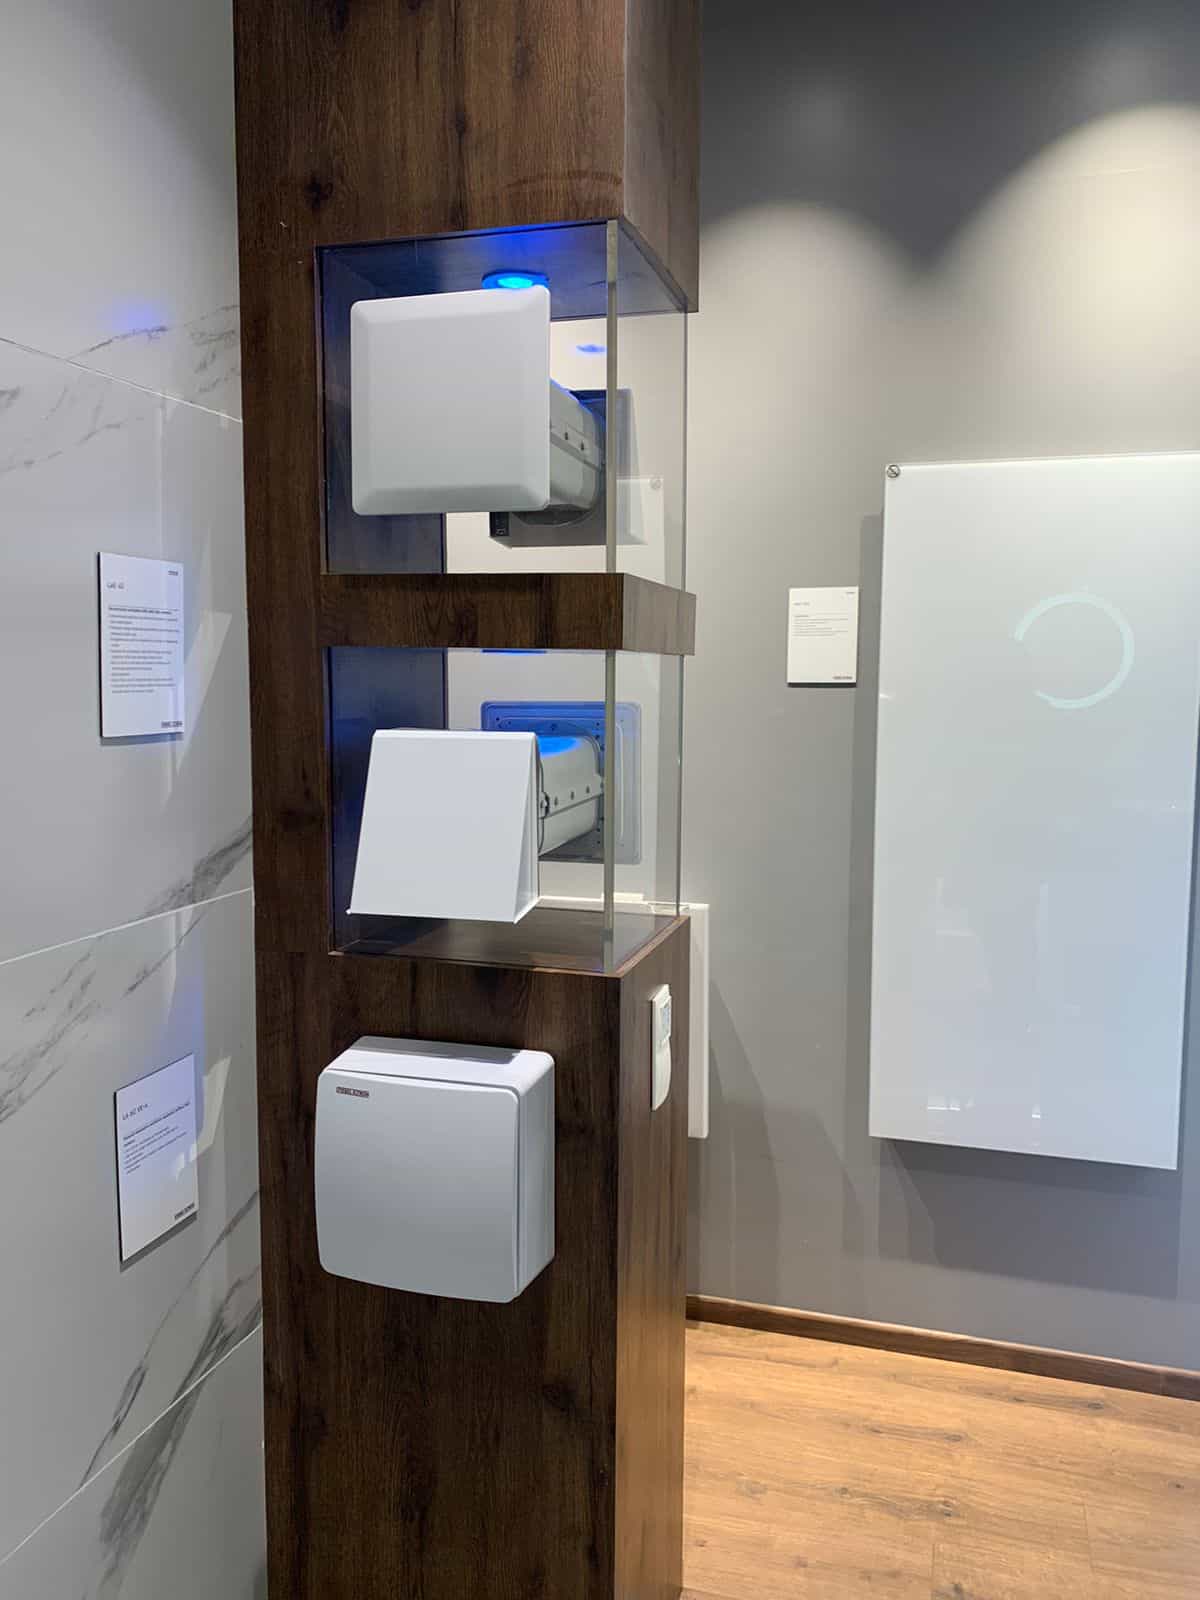 stiebel eltron display centre with green technology and other products